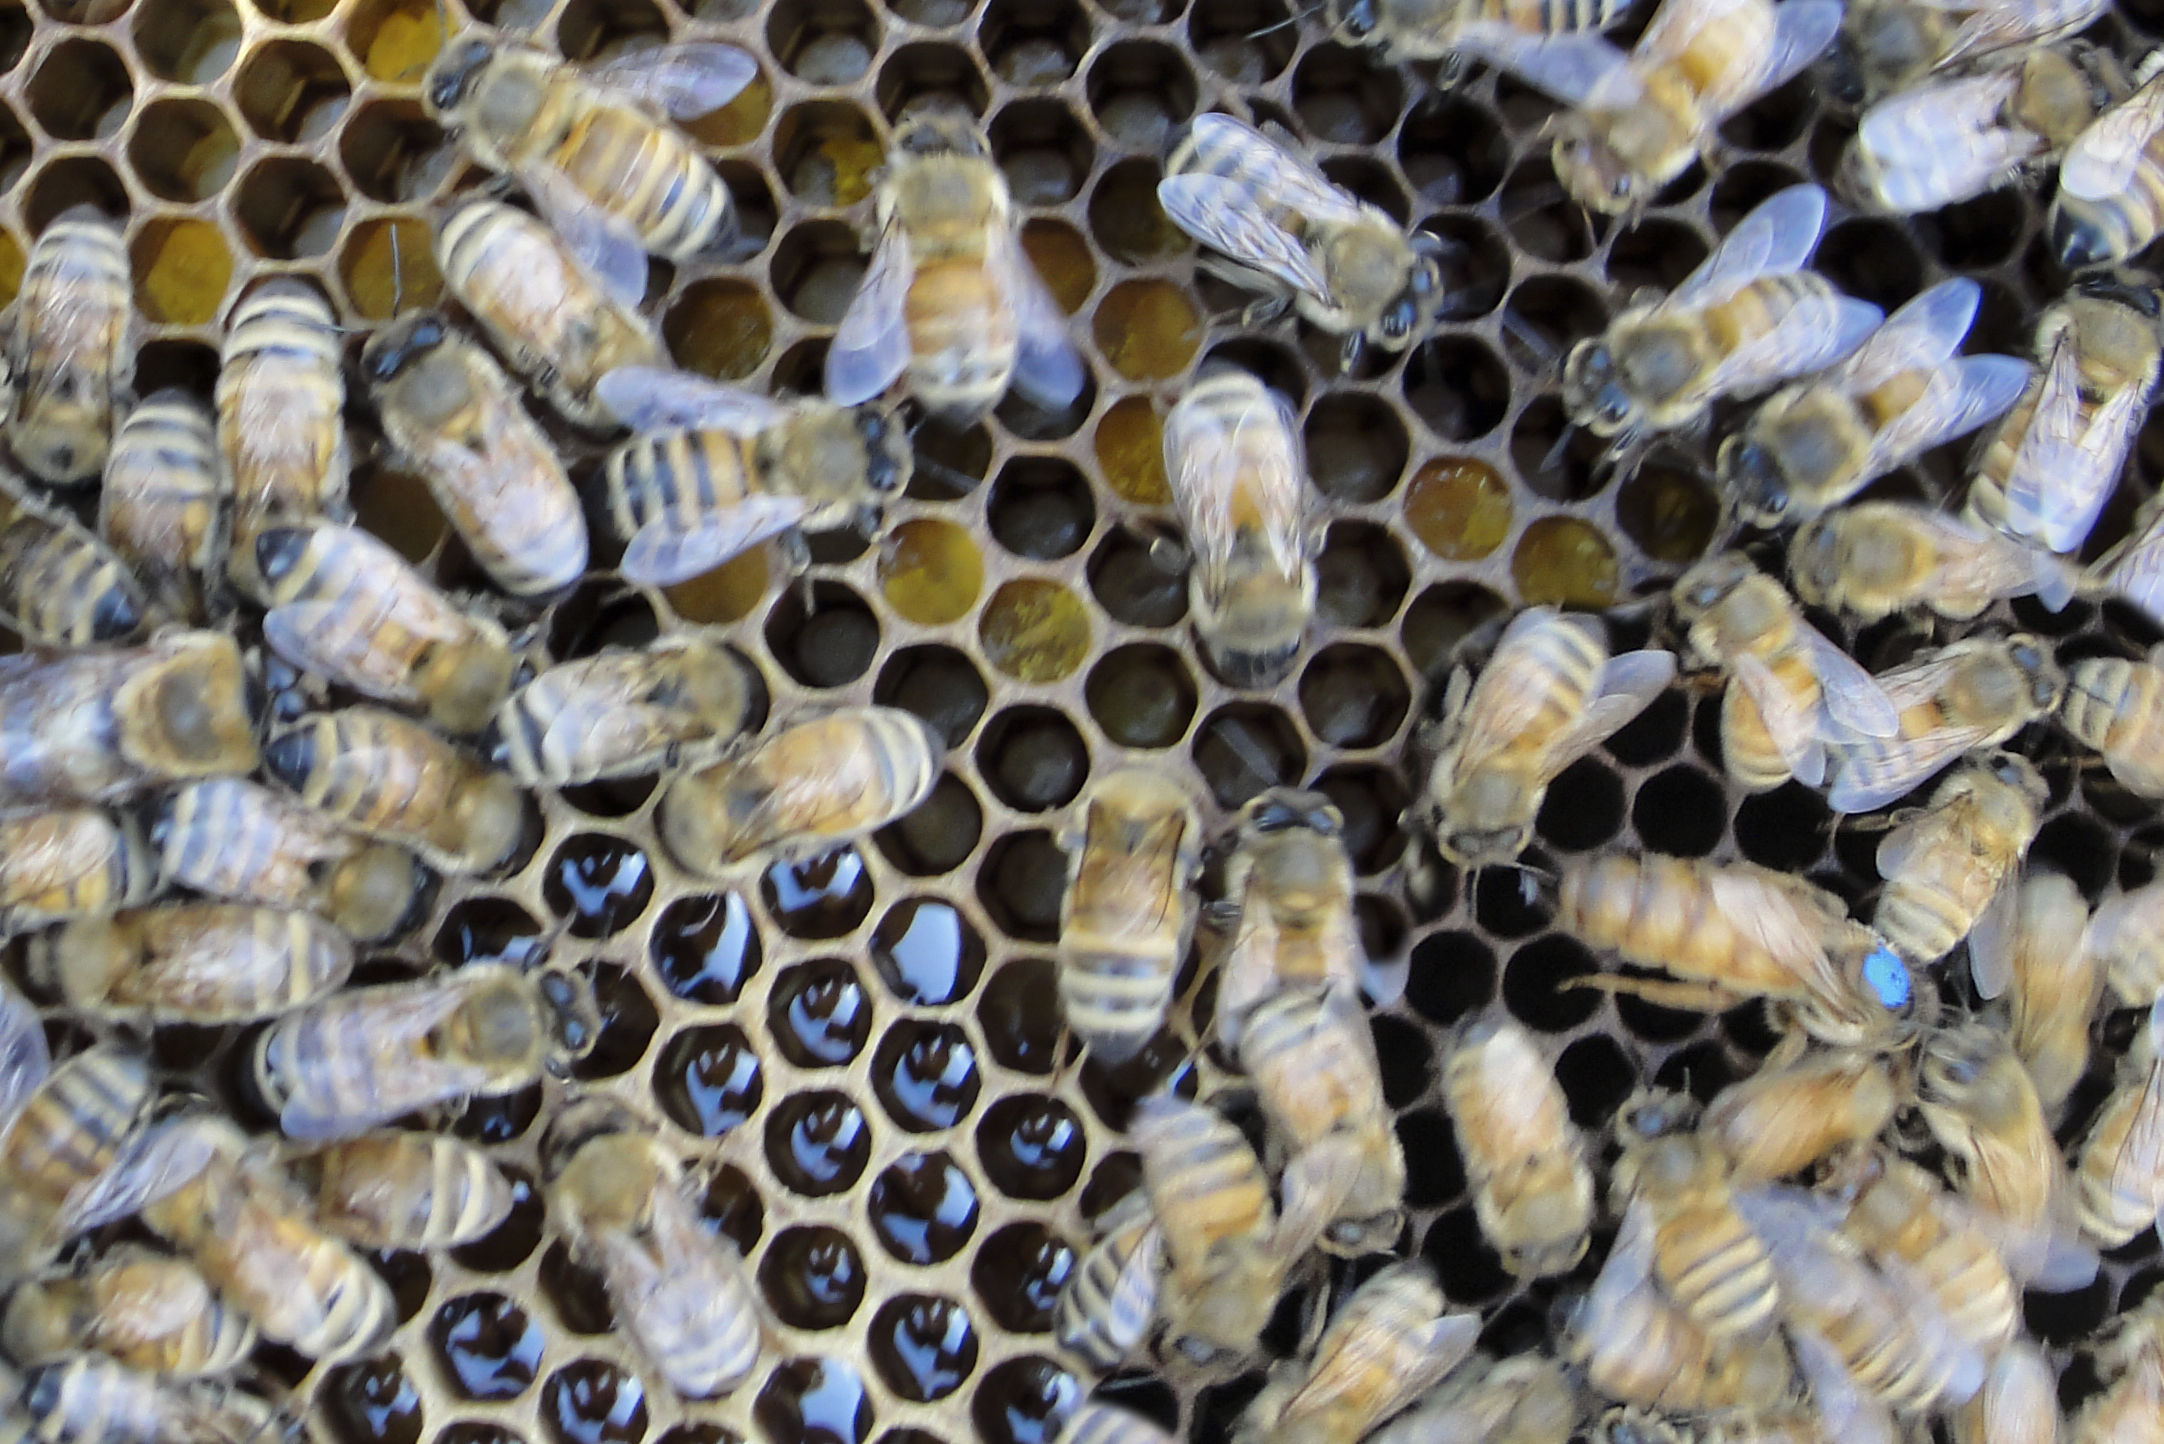 can you spot the Queen bee in this hive